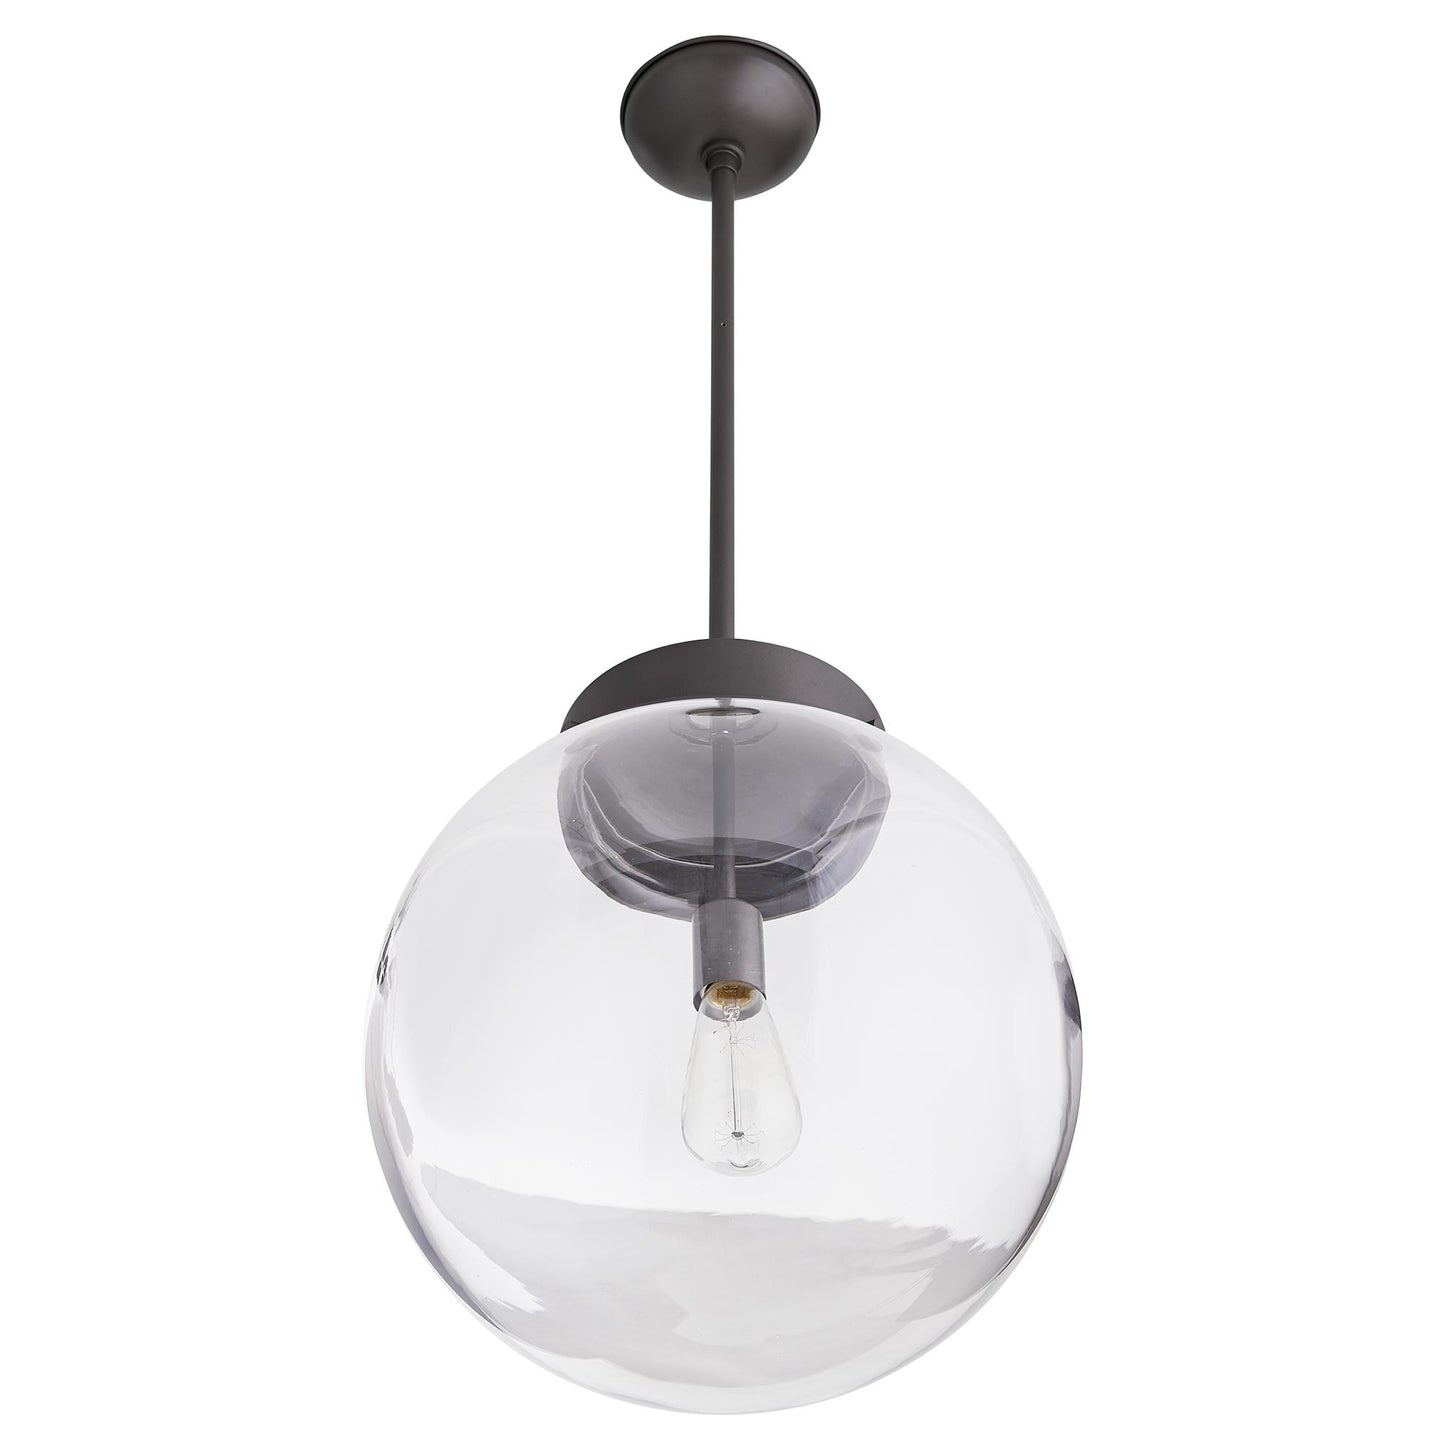 Reeves Large Outdoor Pendant: Heritage Brass Globe Light for Timeless Outdoor Lighting